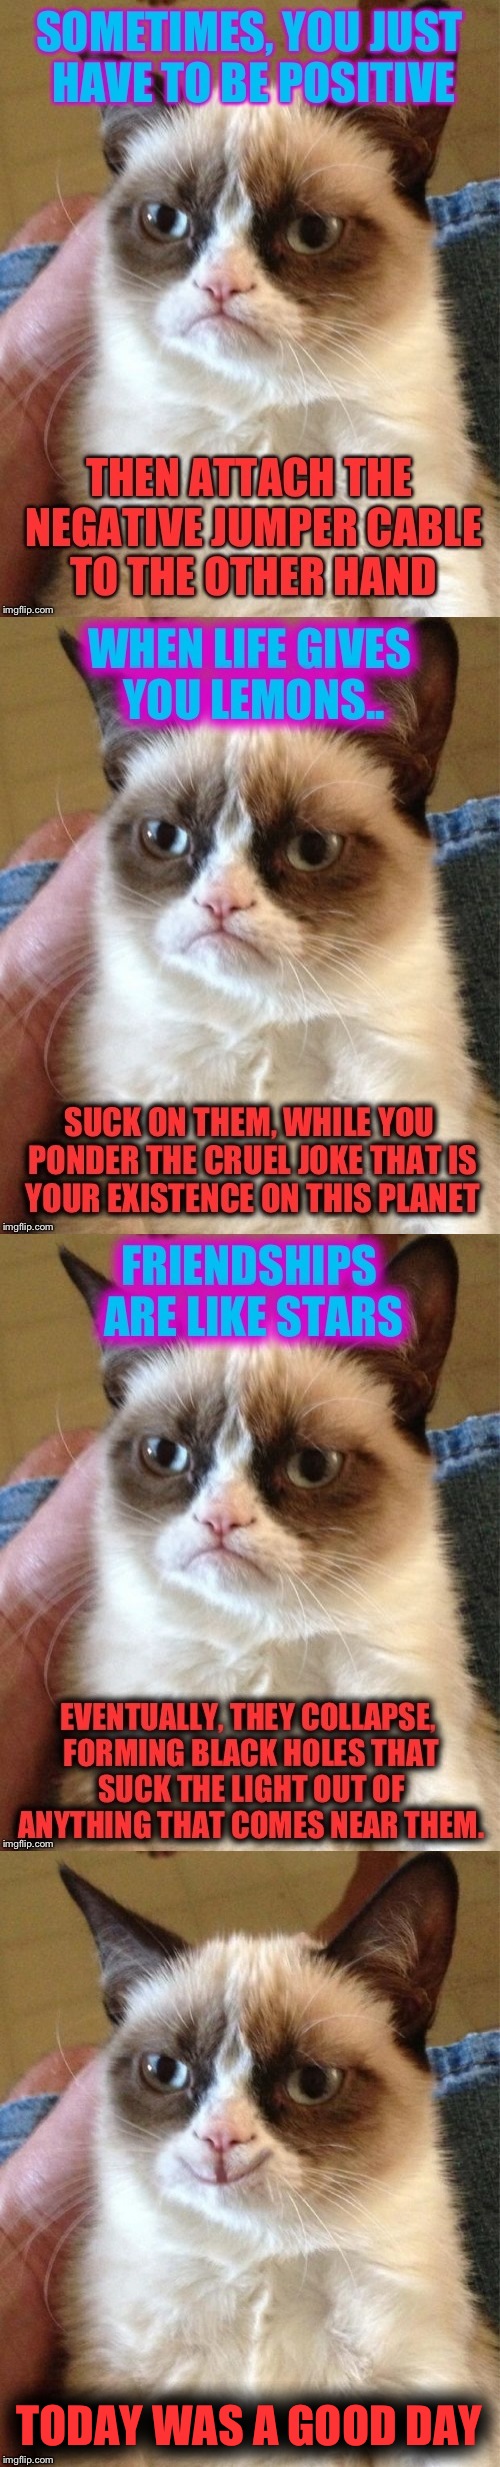 Grumpy Cat Inspirational(?) Quotes to brighten up your day! | TODAY WAS A GOOD DAY | image tagged in grumpy cat,inspirational quote,memes,meme chain,funny | made w/ Imgflip meme maker